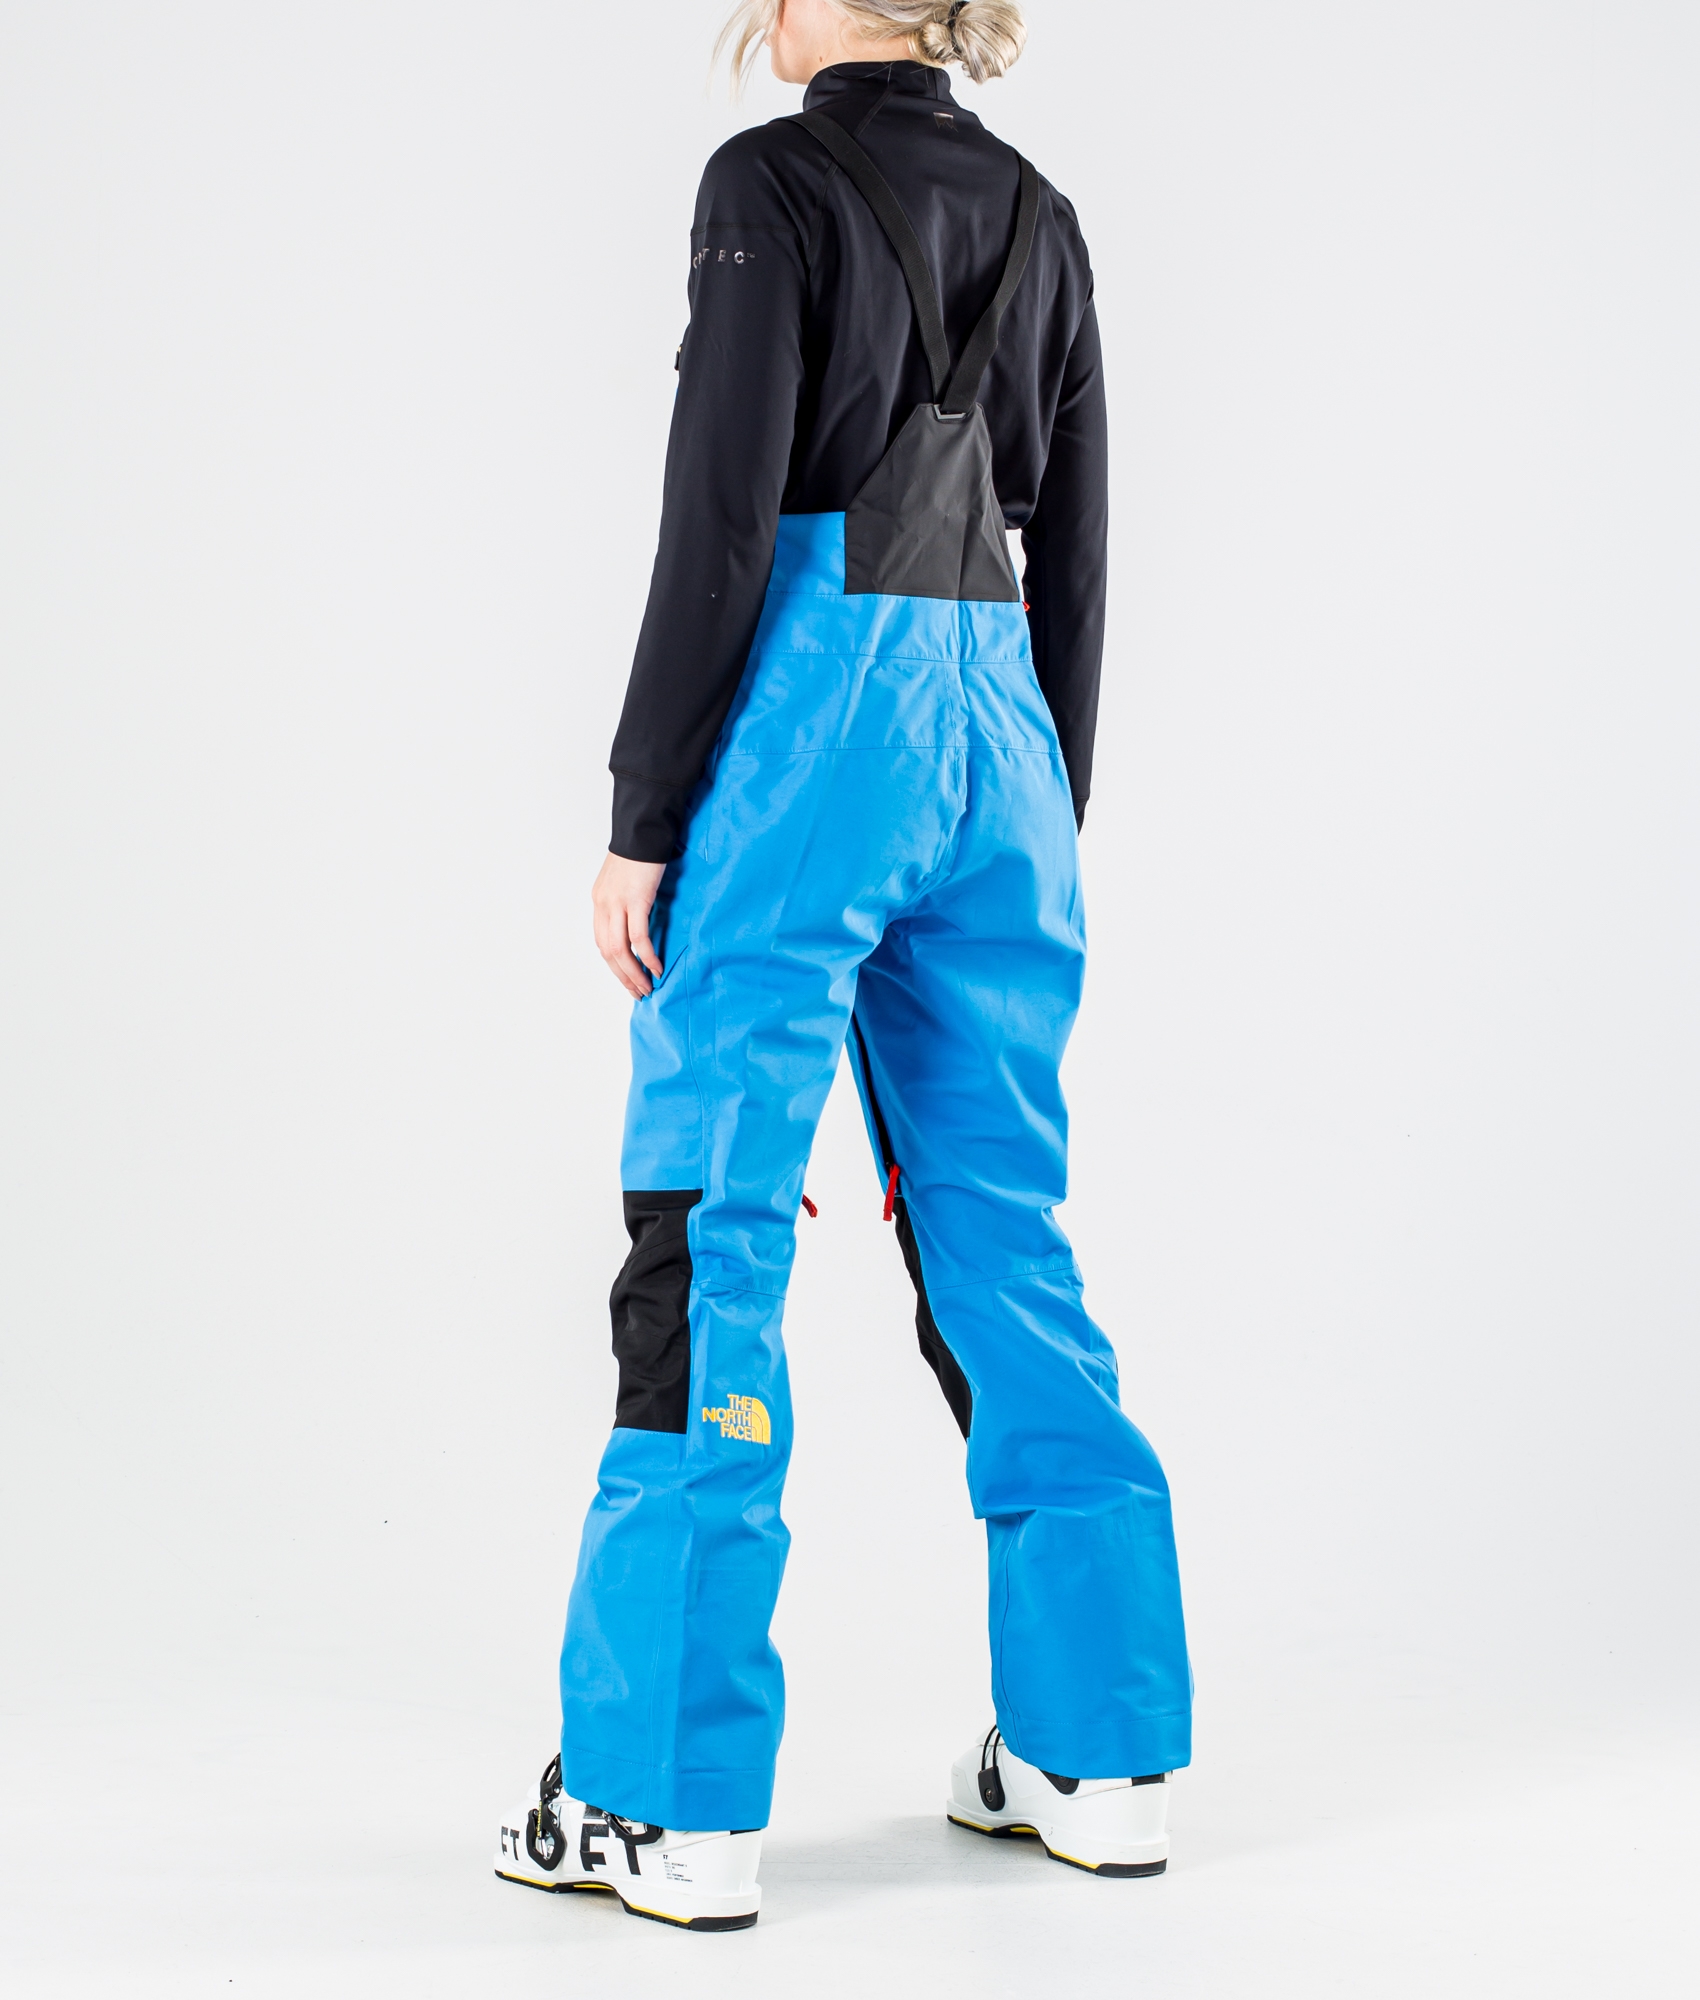 The North Face Team Kit Ski Pants Clear 